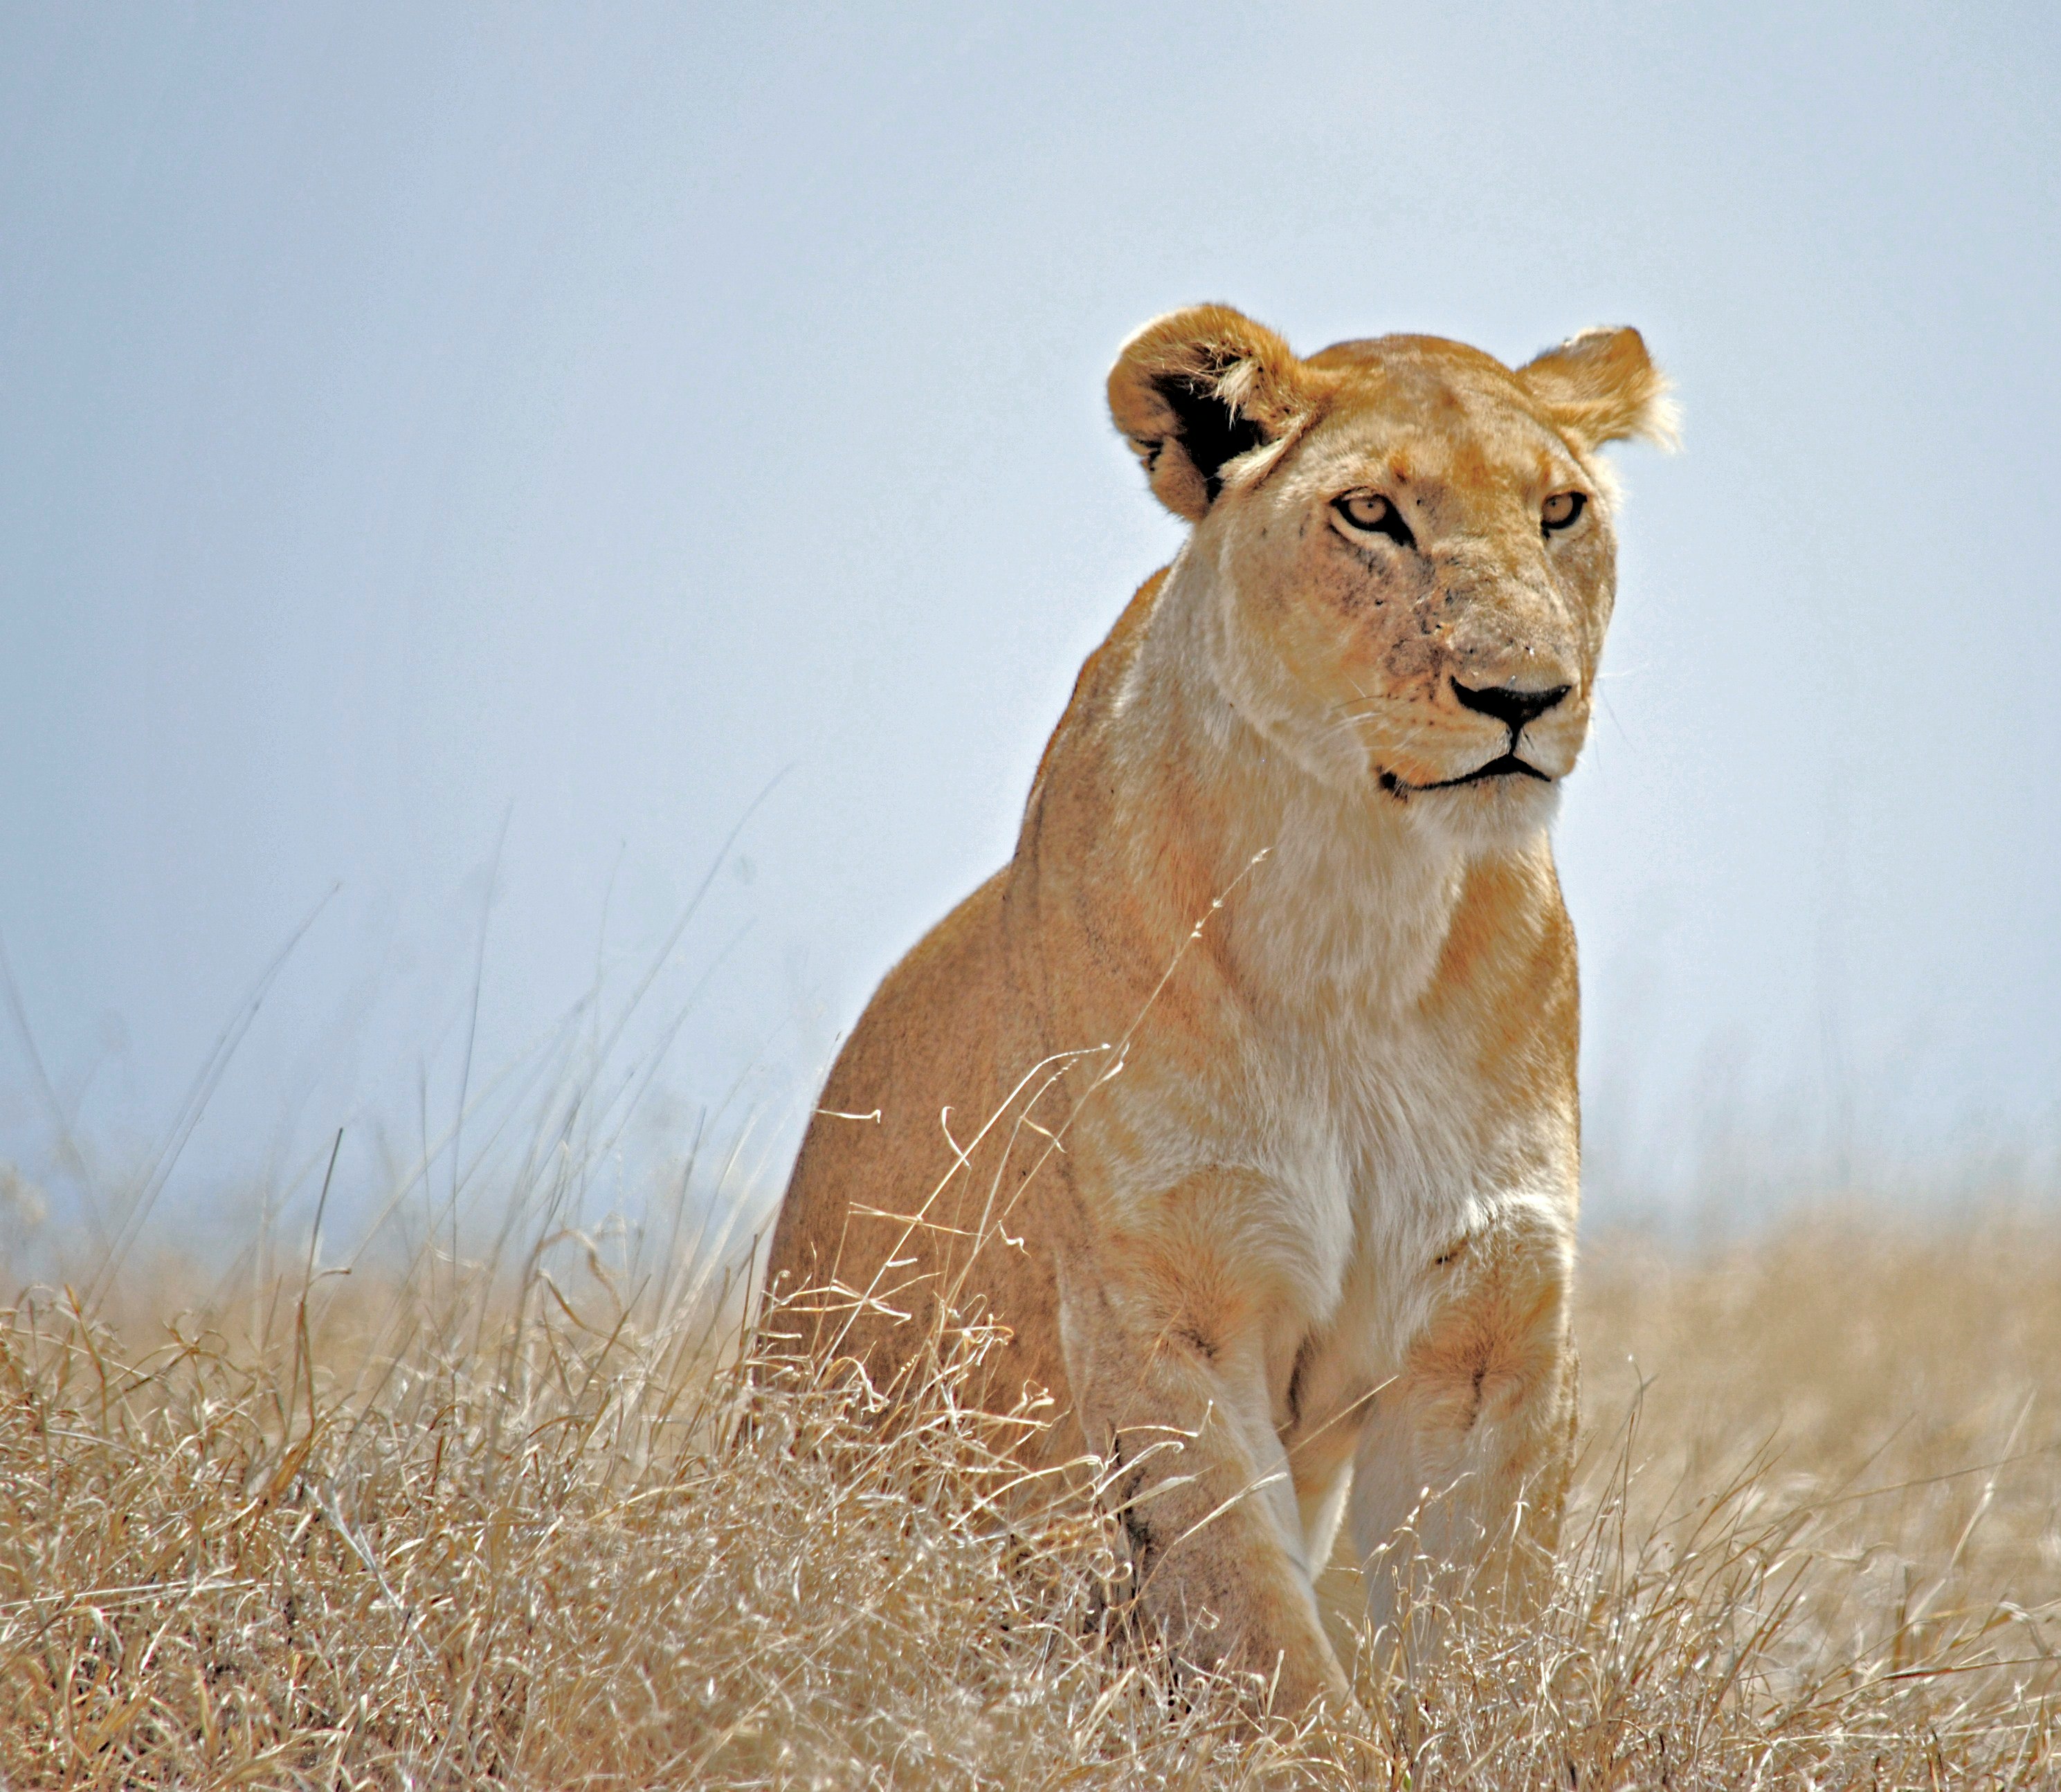 Lioness observing prey species from advantage point in Serengeti NP Tanzania